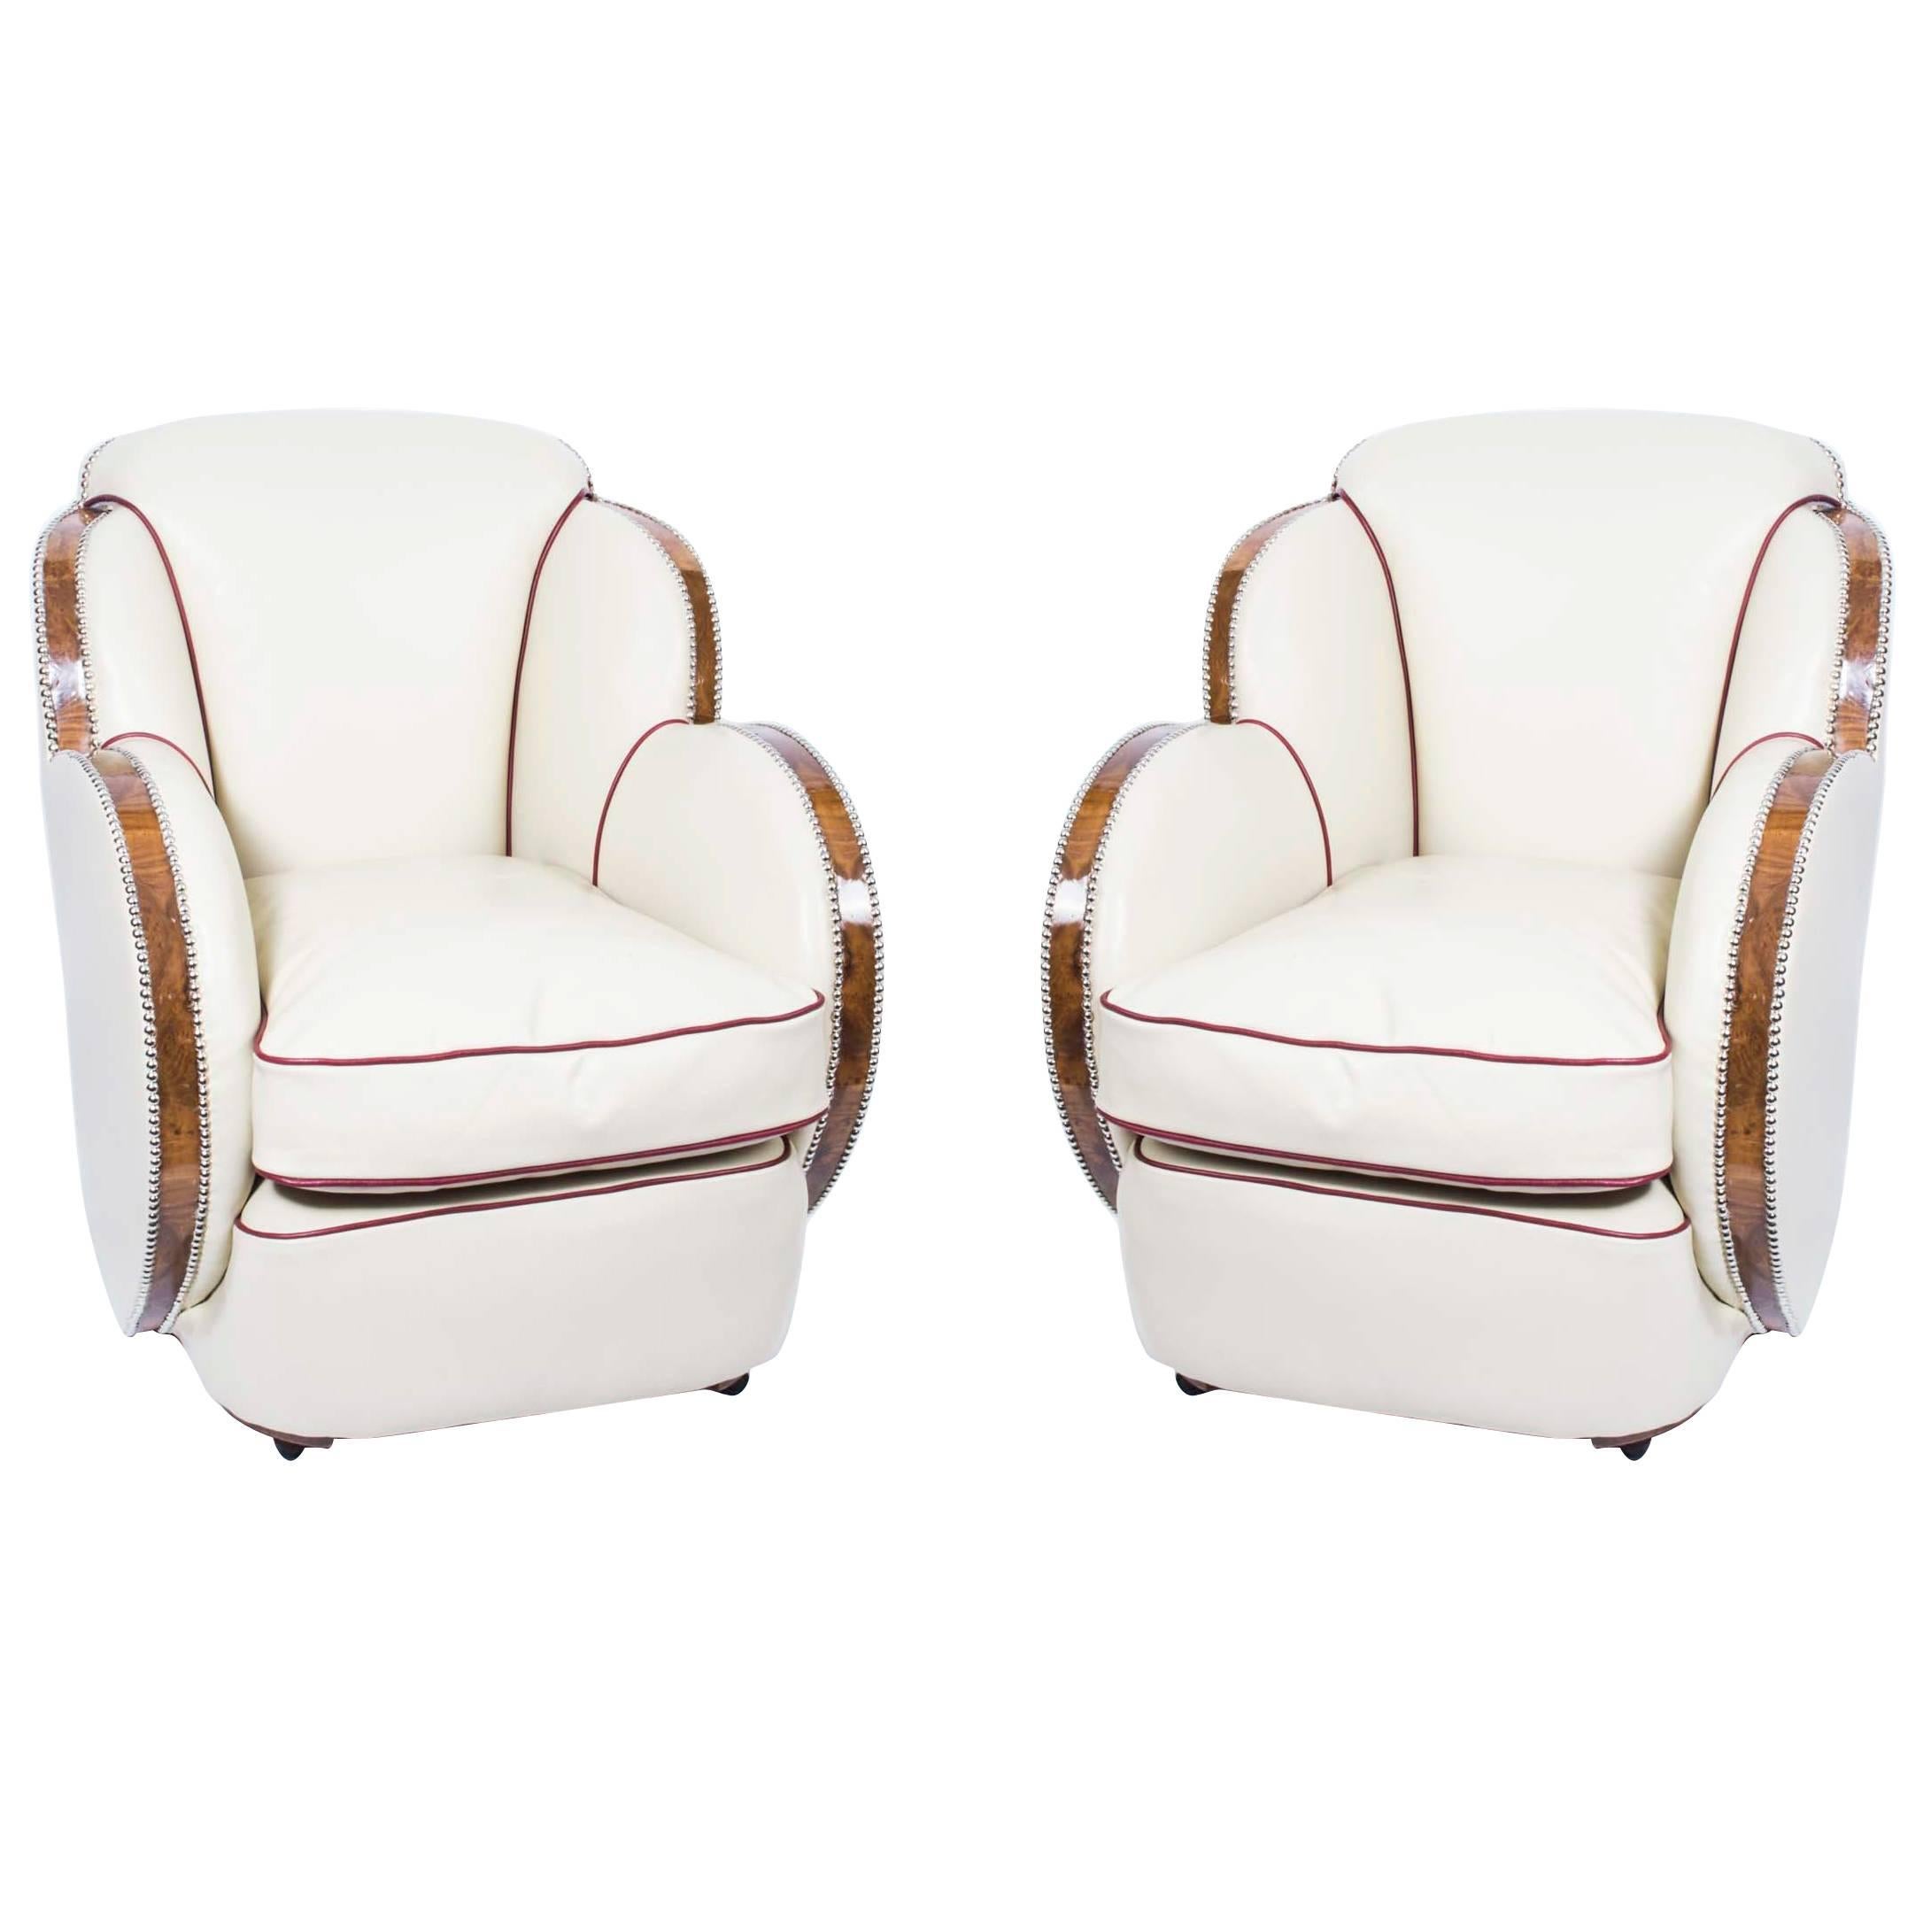 1930s Pair of White Leather Art Deco Cloud Armchairs